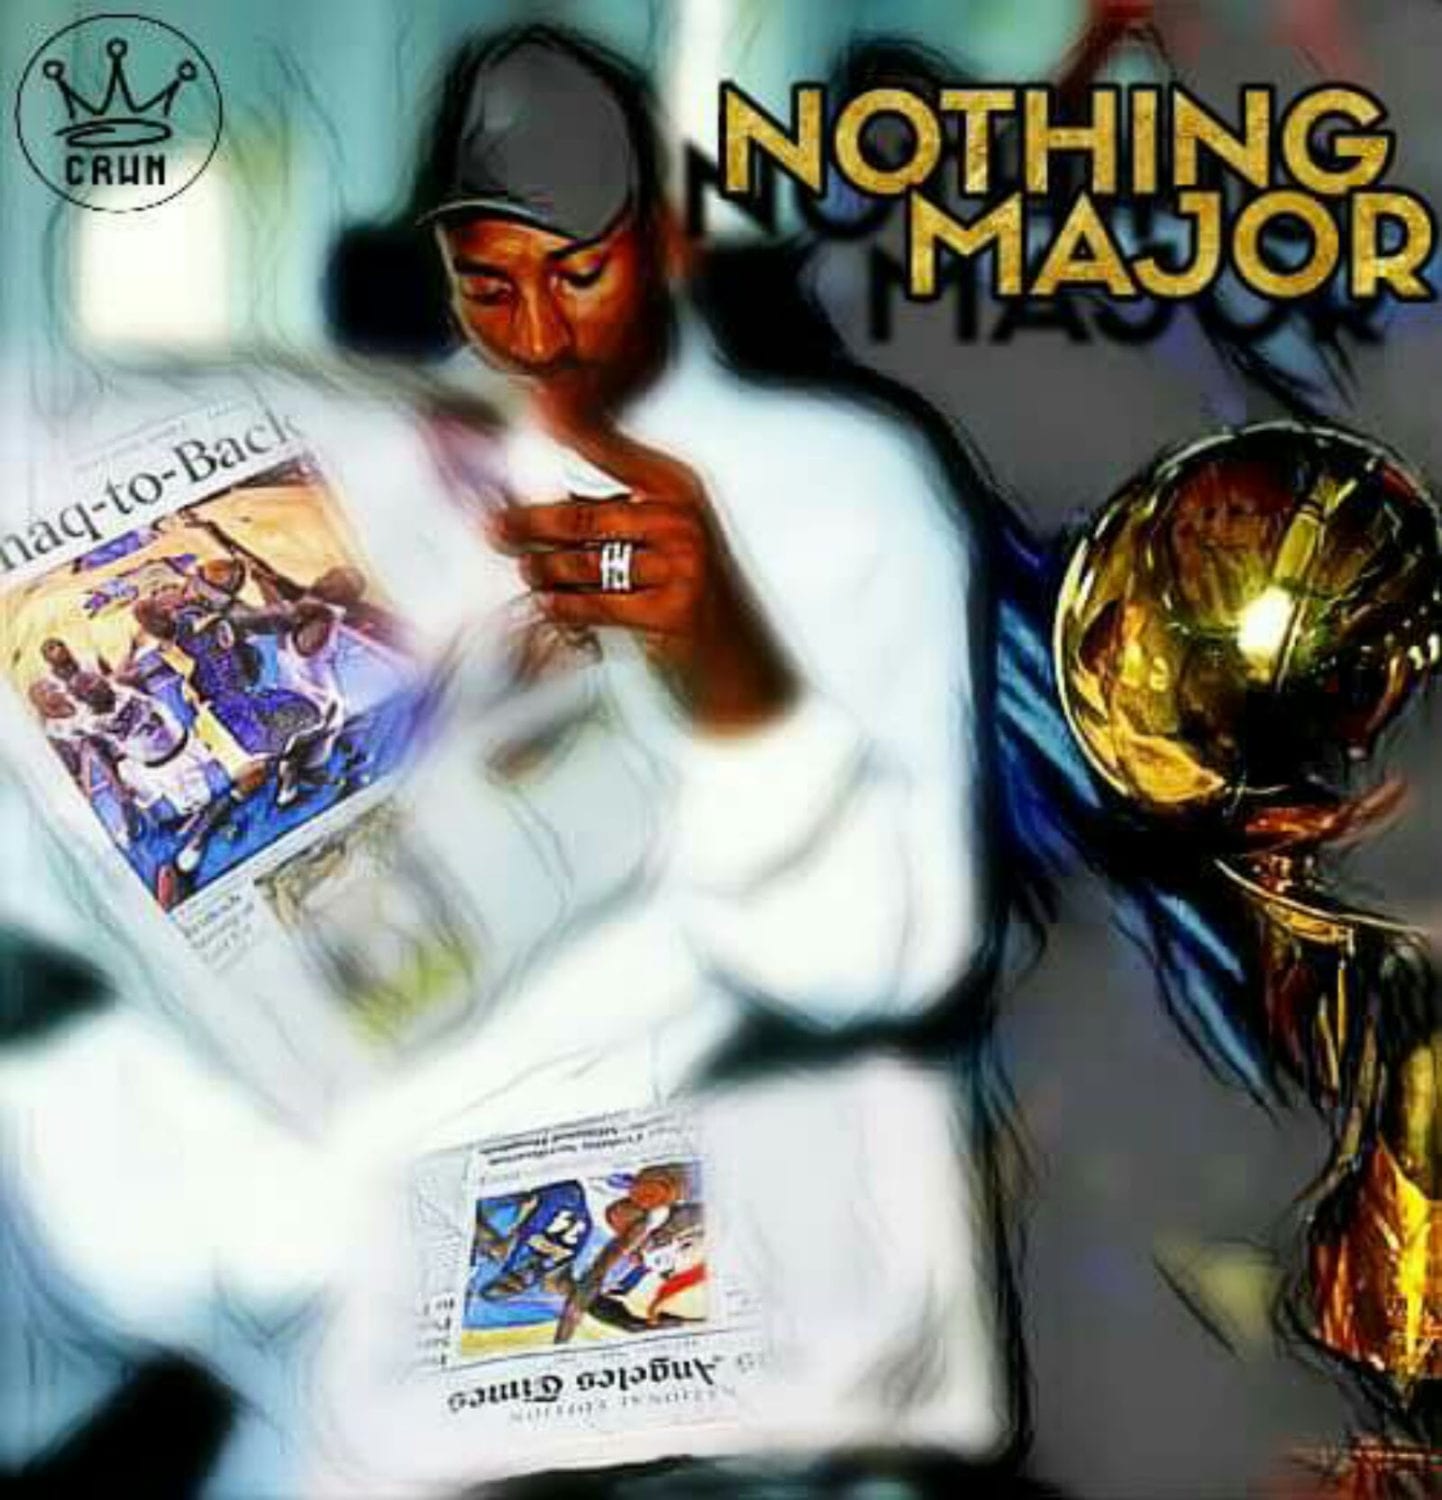 New Project By Stacks Lyrics & Cypha - Nothing Major EP